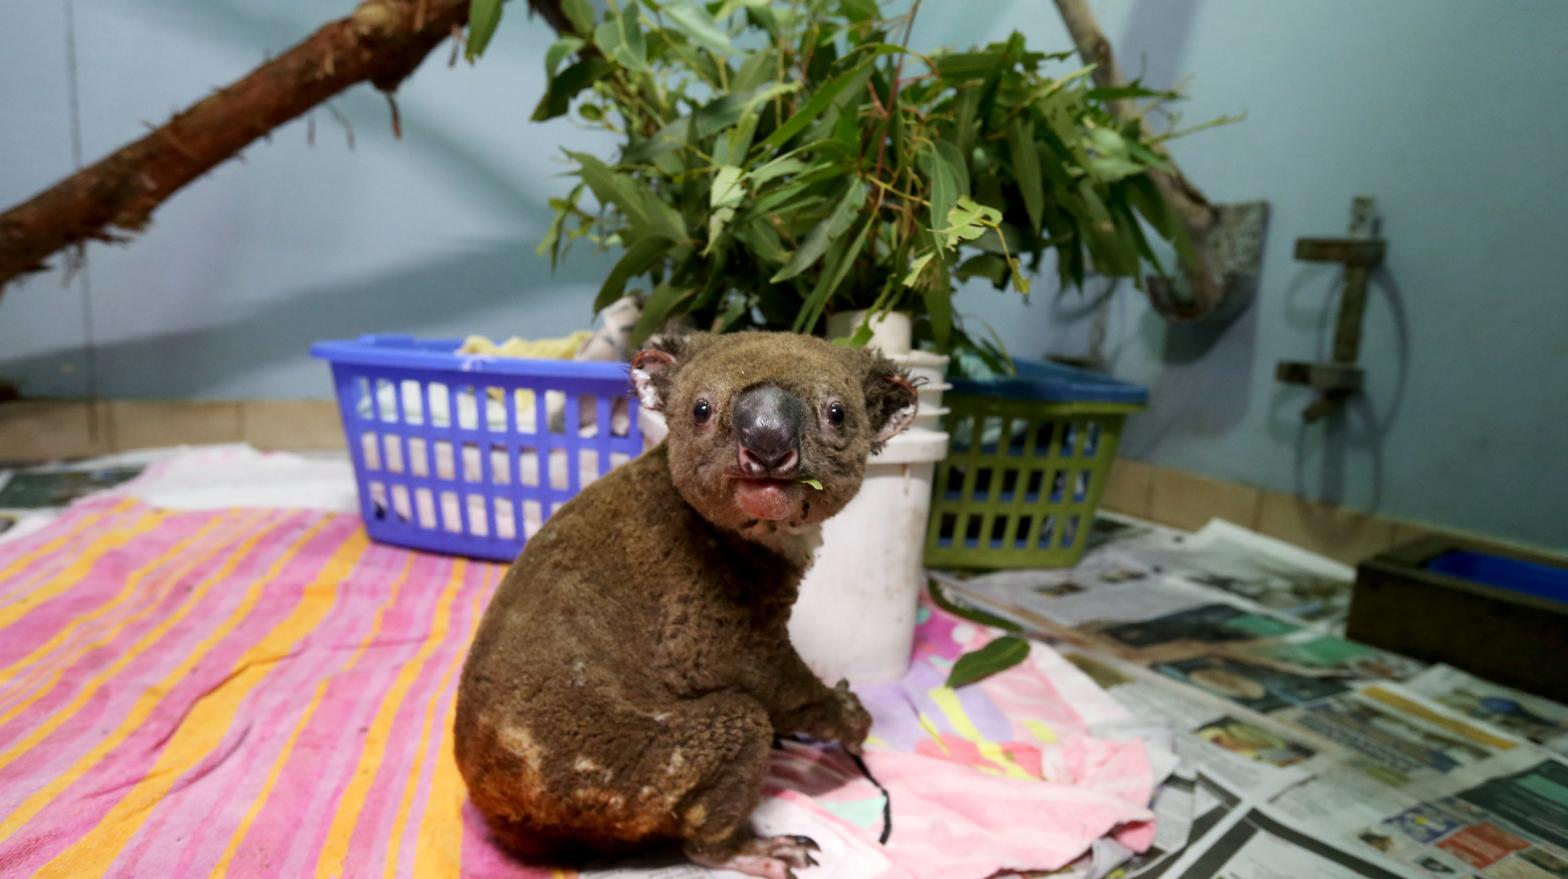 A koala named Paul from Lake Innes Nature Reserve recovers from his burns in the ICU at The Port Macquarie Koala Hospital on November 29, 2019 in Port Macquarie, Australia. (Photo: Nathan Edwards, Getty Images)